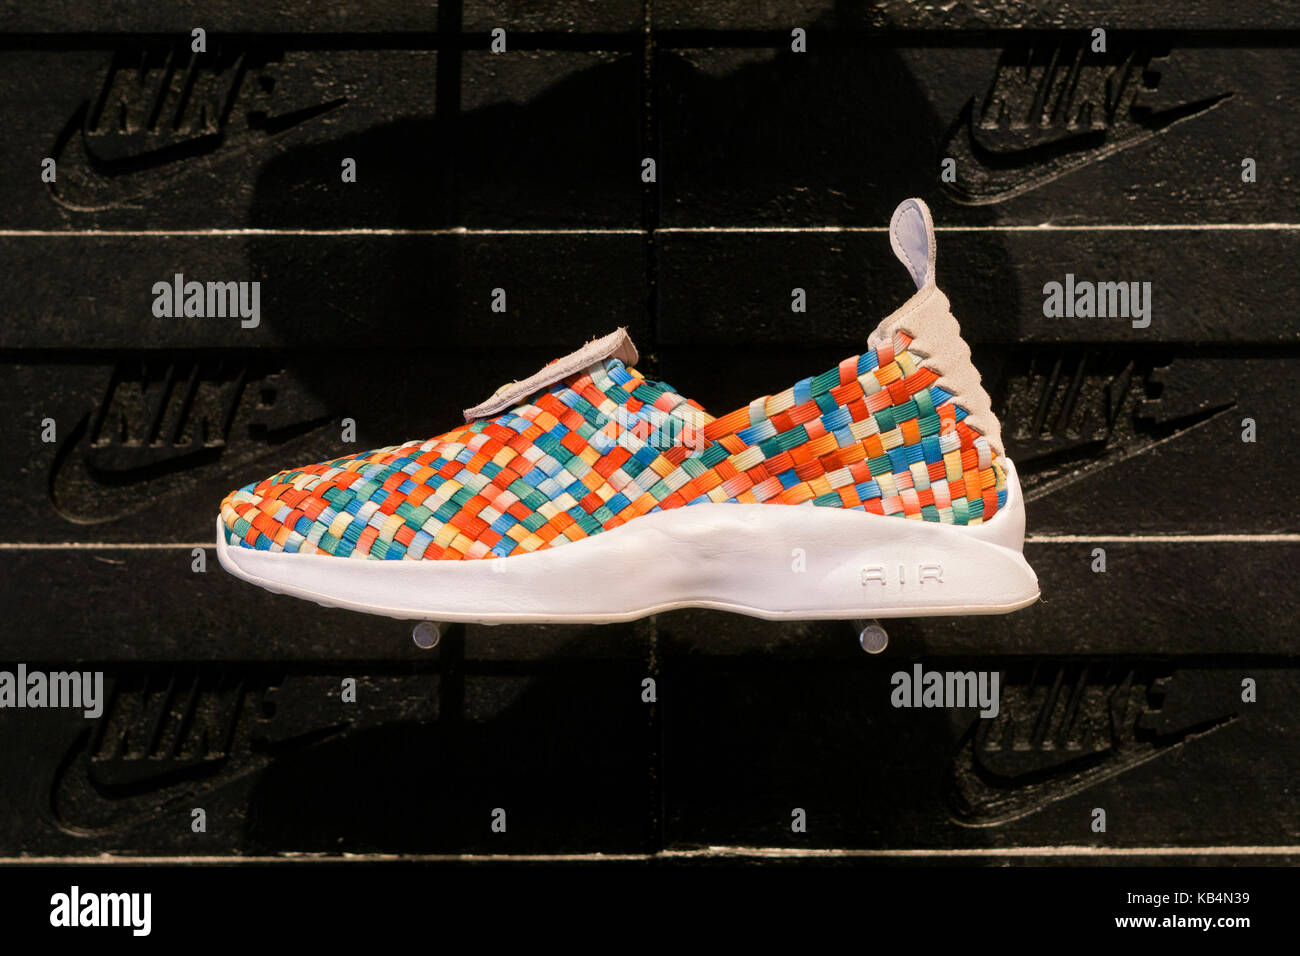 Nike Air Woven Premium shoes for sale for $160 at the Nike KITH store on Broadway in Greenwich Village, New York City. Stock Photo